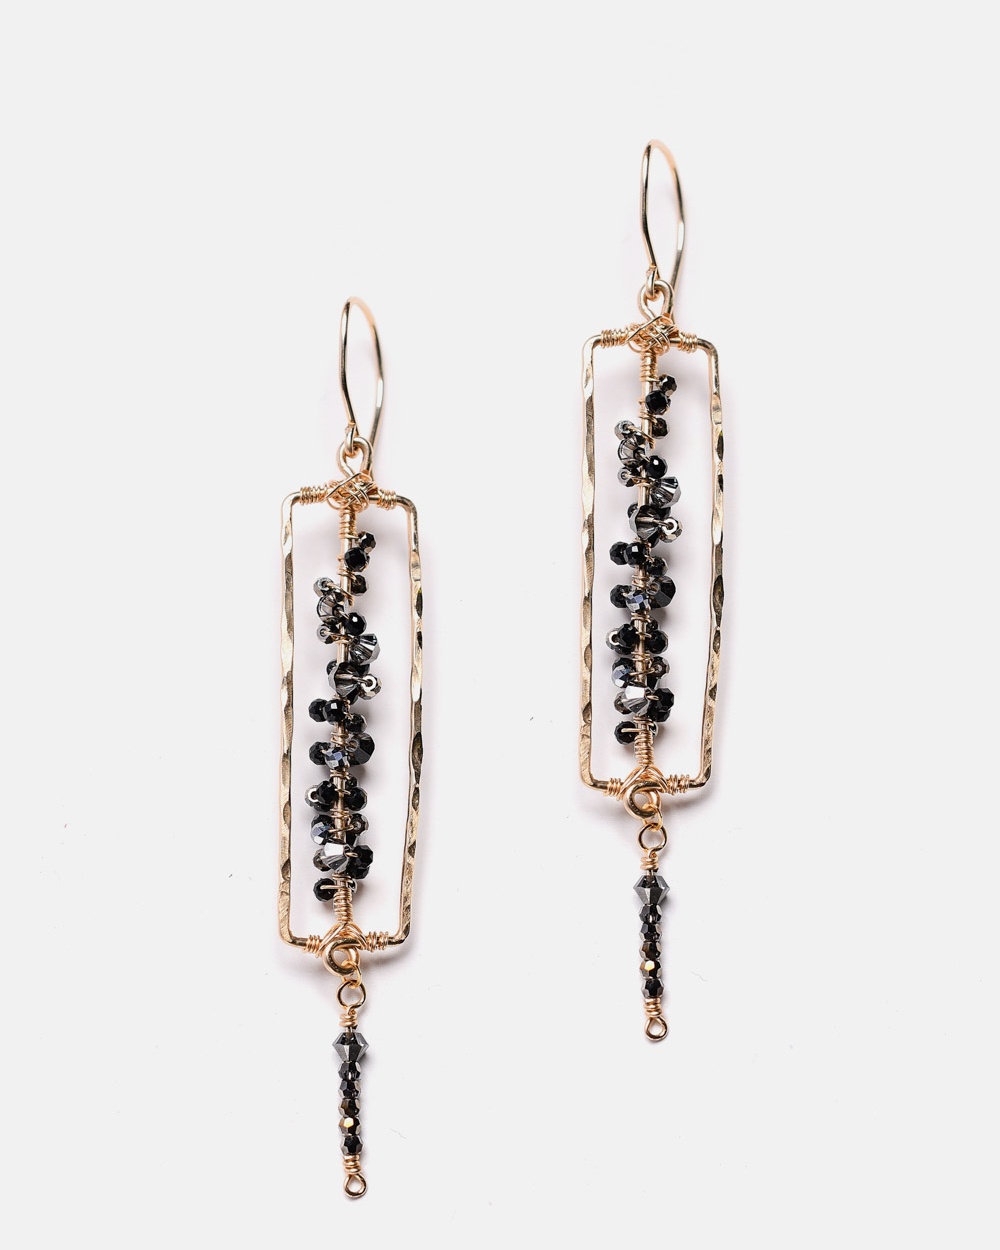 14k gold filled drop earrings with black spinel and graphite crystals